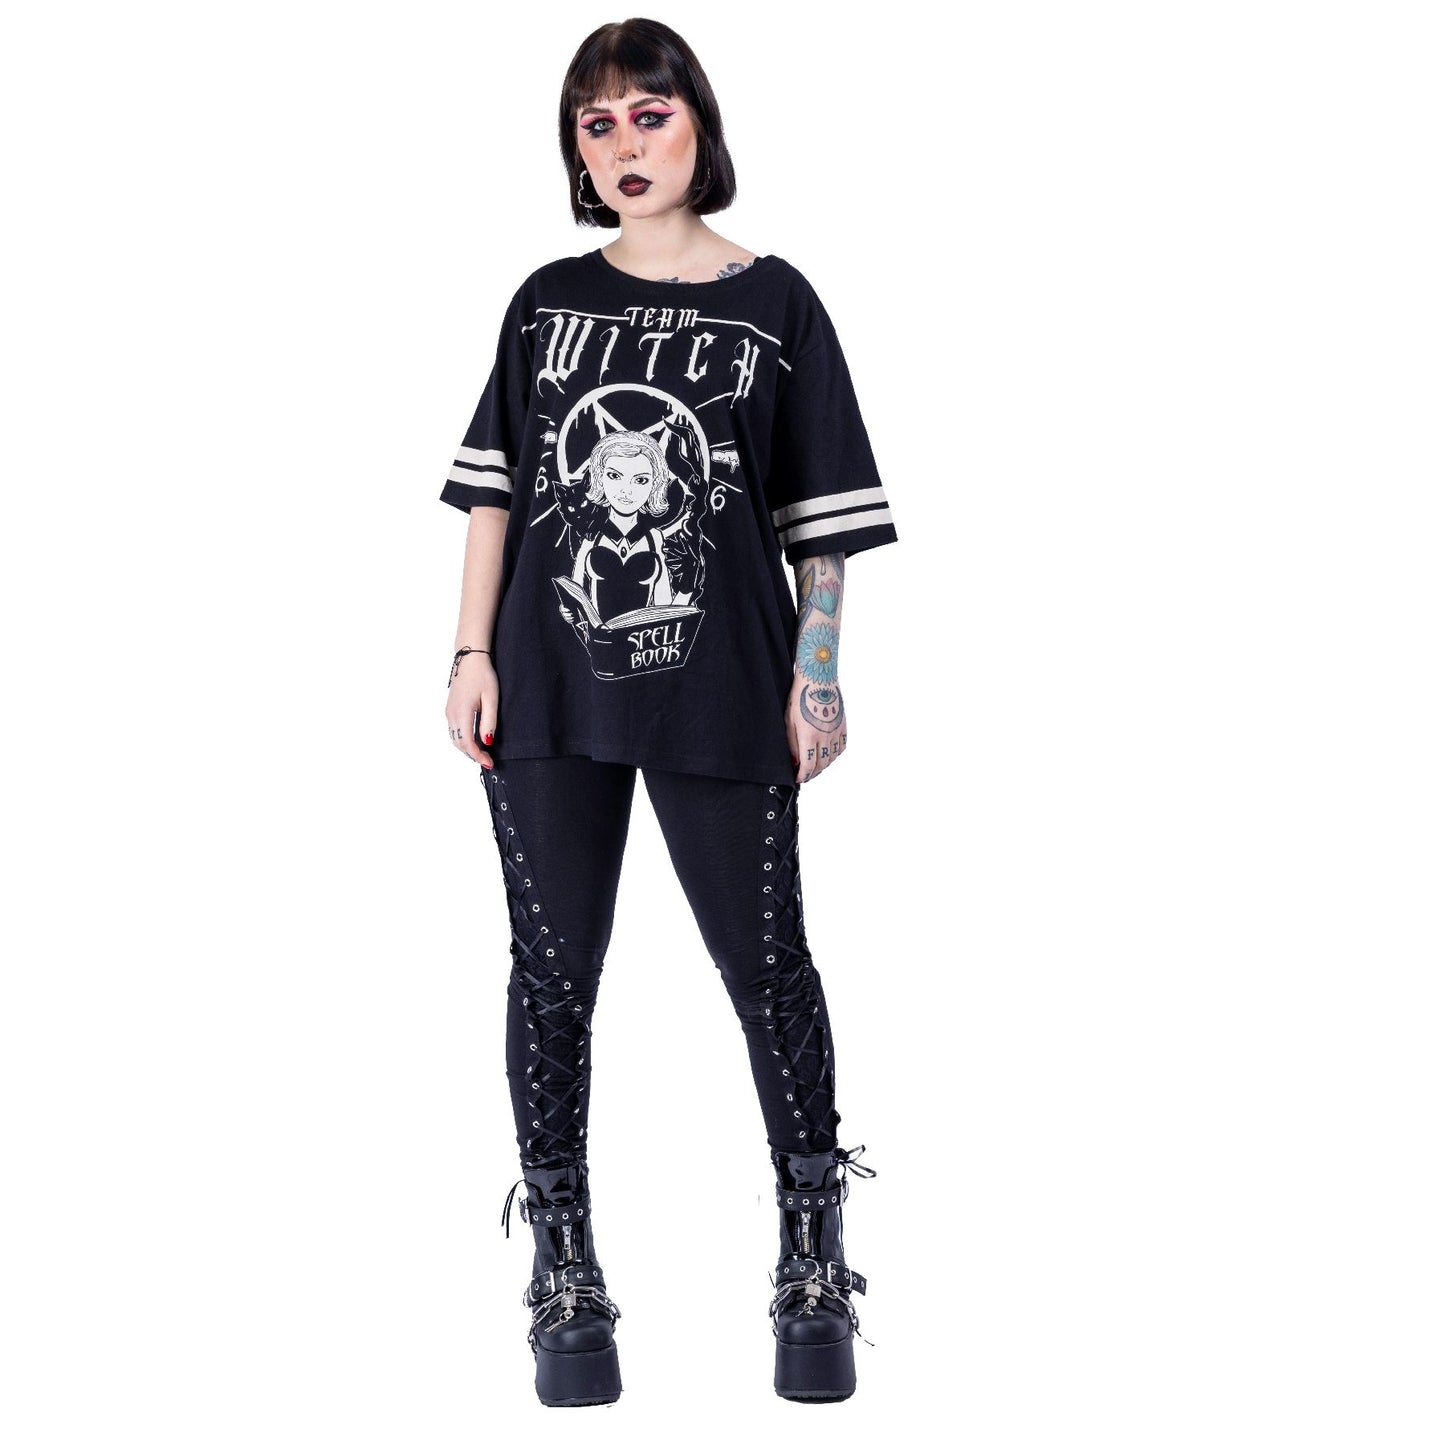 TEAM WITCH TOP - BLACK